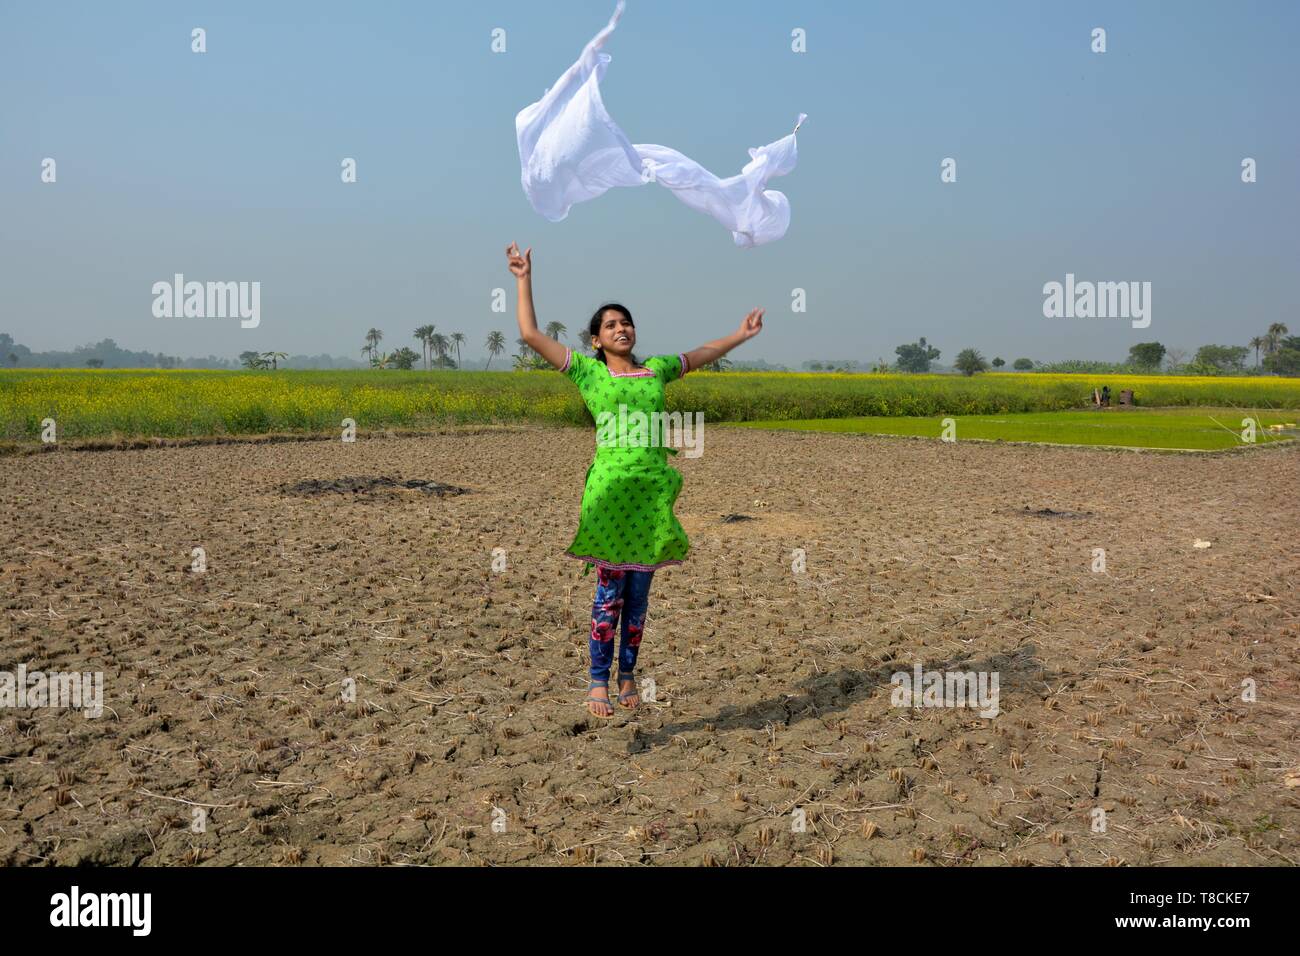 A girl wearing a salwar kameez flying a white dhupatta / clothin the air in a field on a bright day, selective focusing Stock Photo